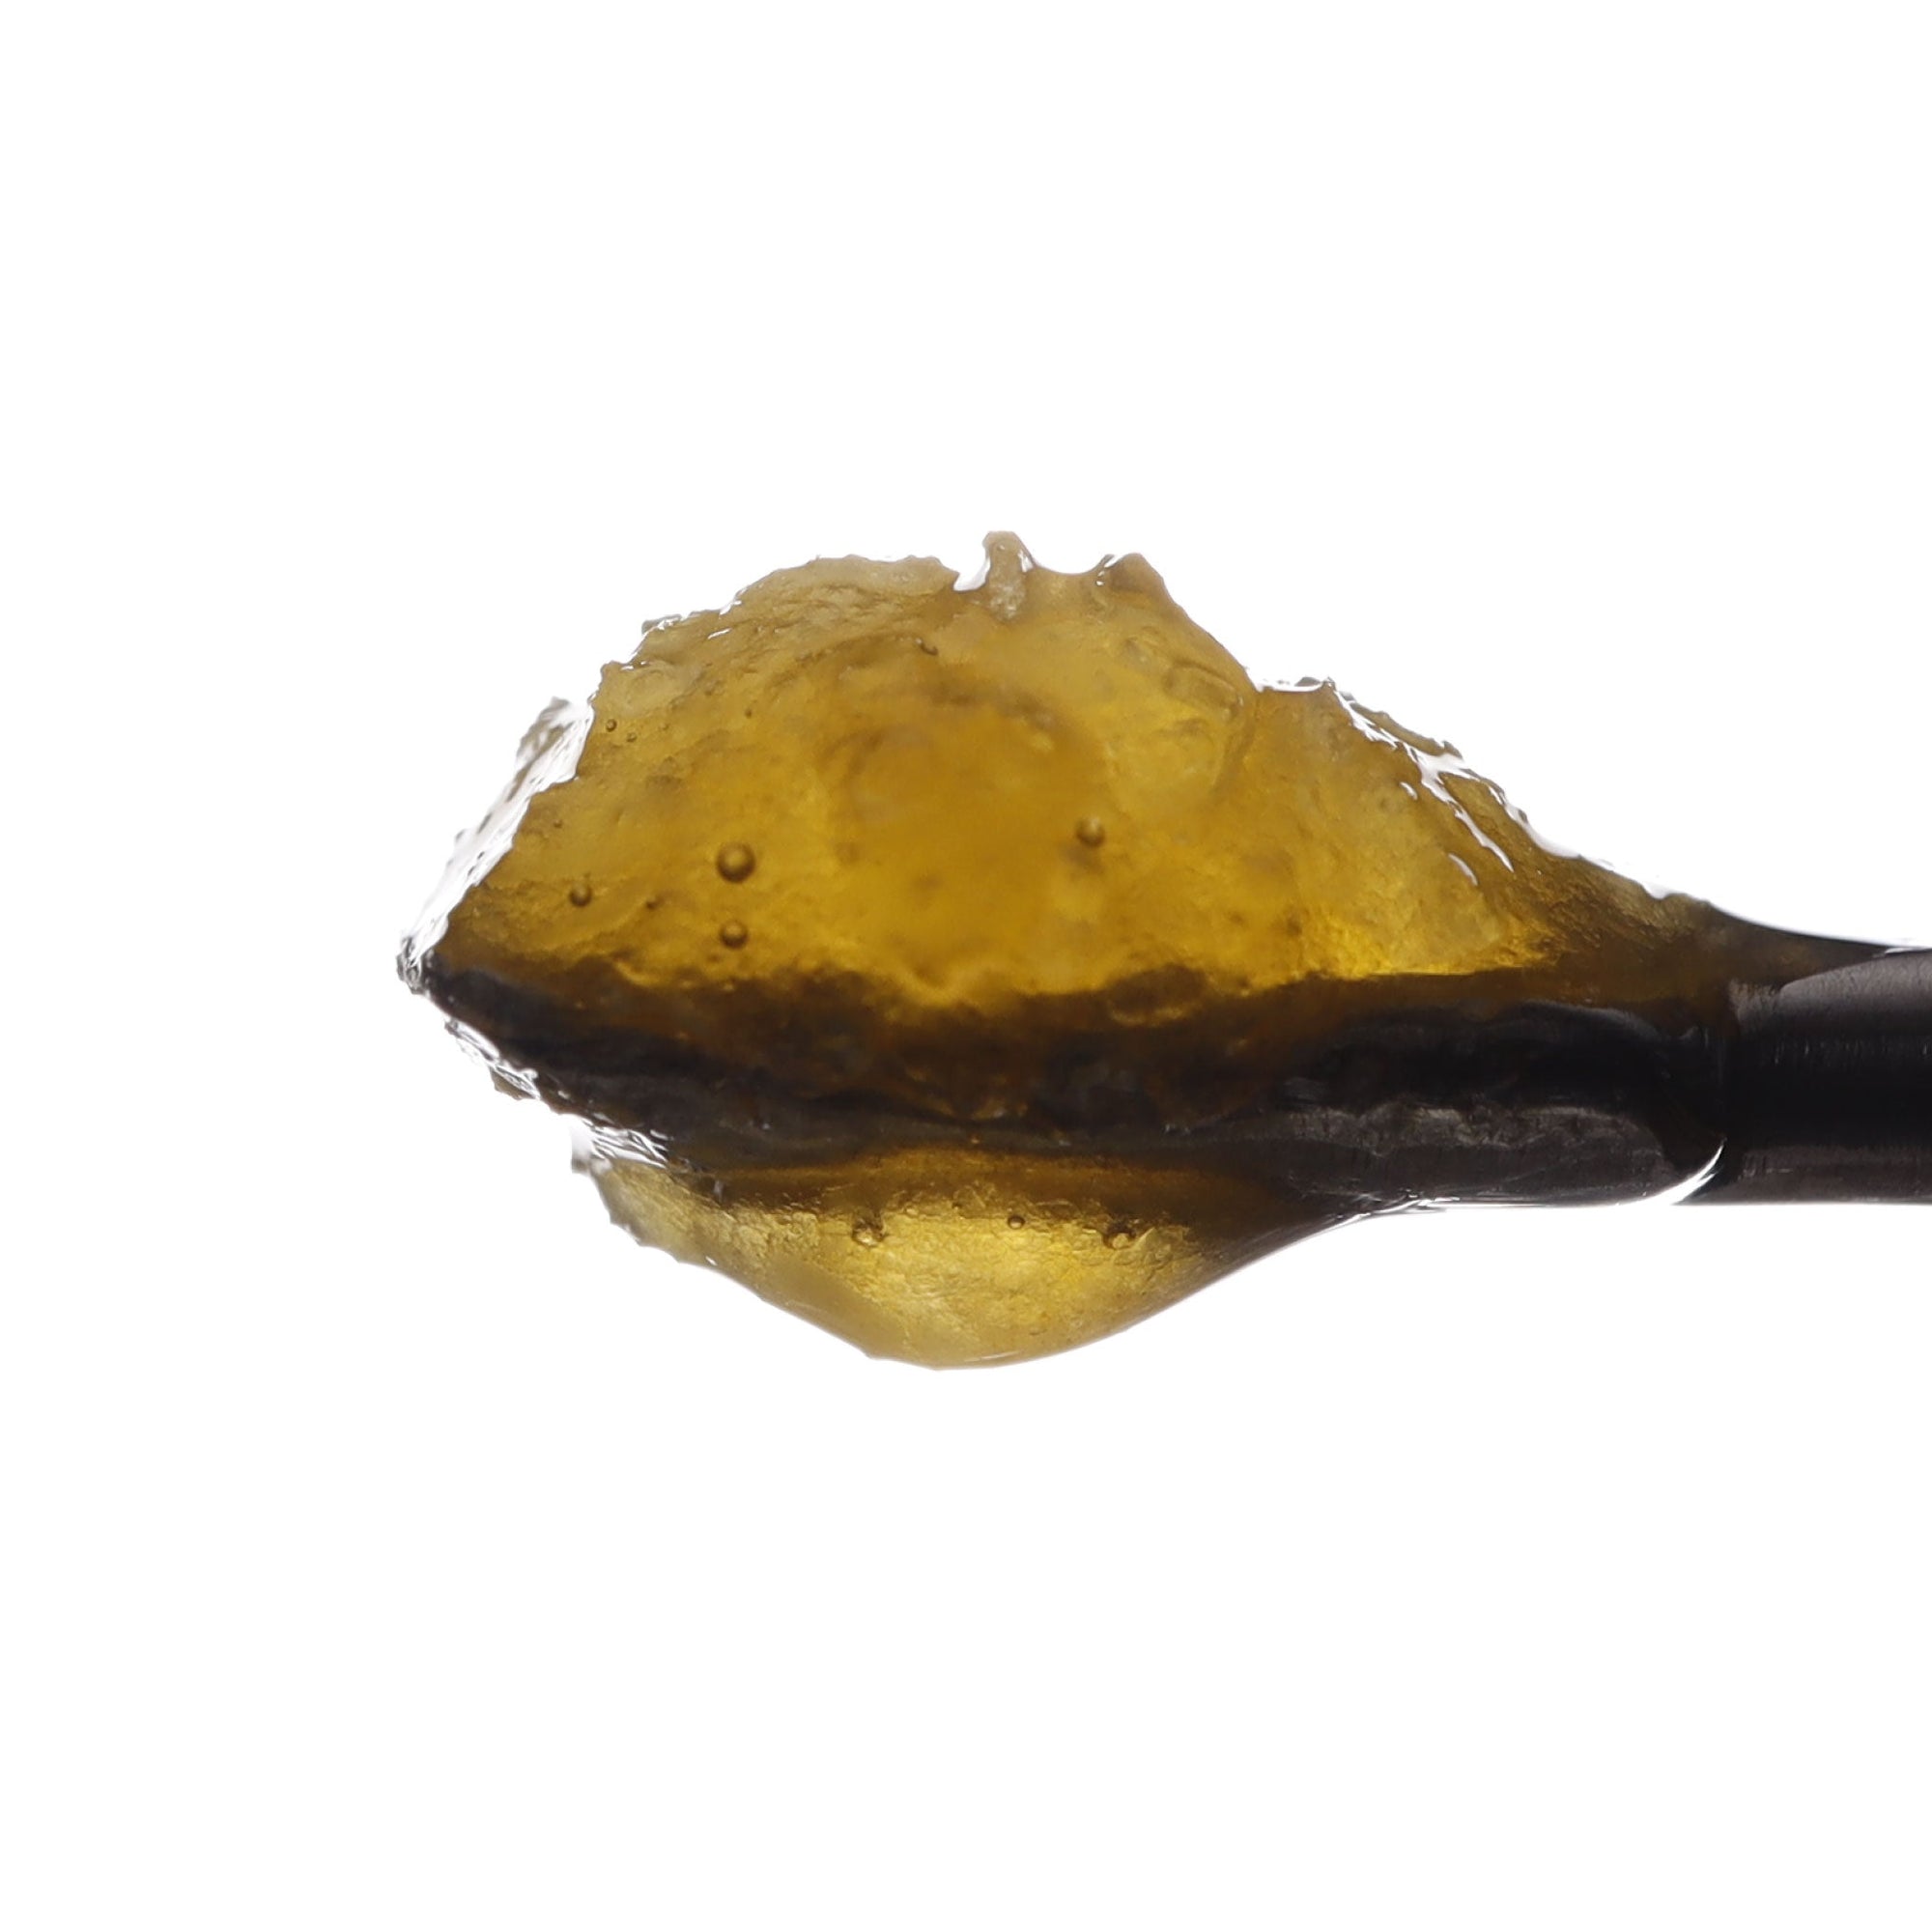 Image of Mixed CBD Live Resin on a dab tool.